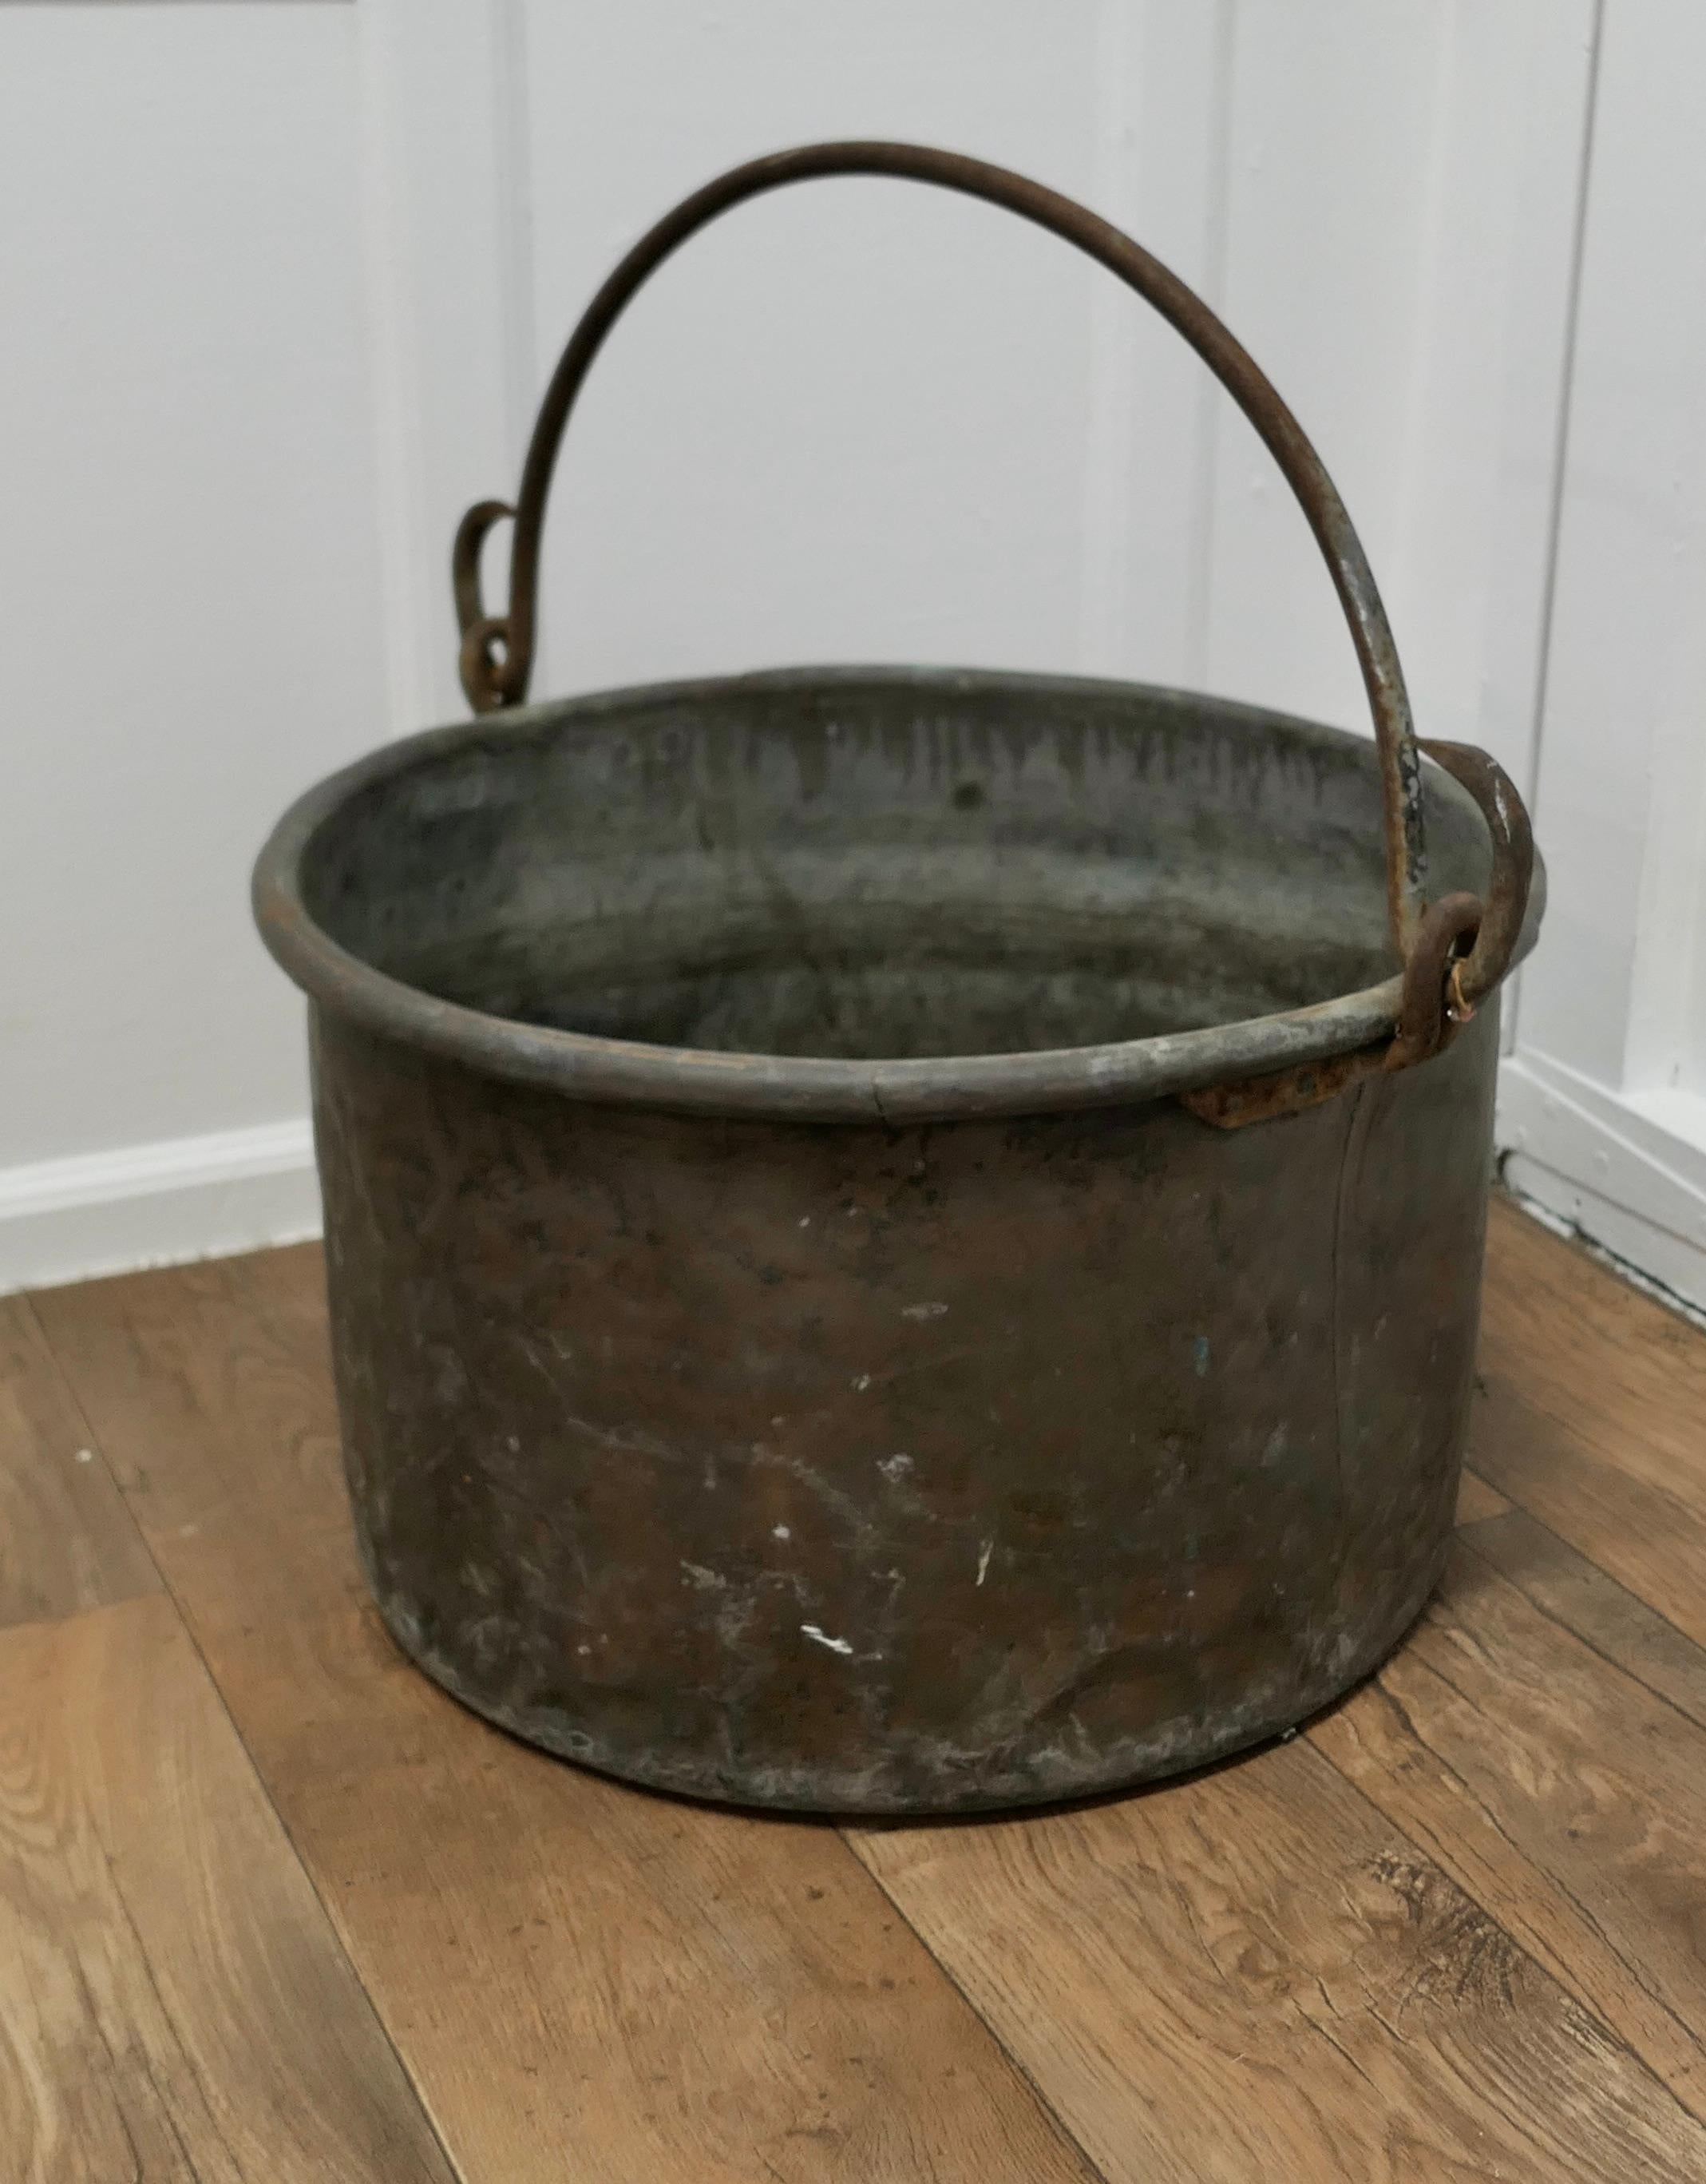 A Large Beaten Brass Log Bin

A lovely piece, the brass has a fully age darkened patina, it is made in the traditional way, beaten in Brass with an Iron Swing handle

The Bucket is 15” tall and 26” in diameter
MS52.